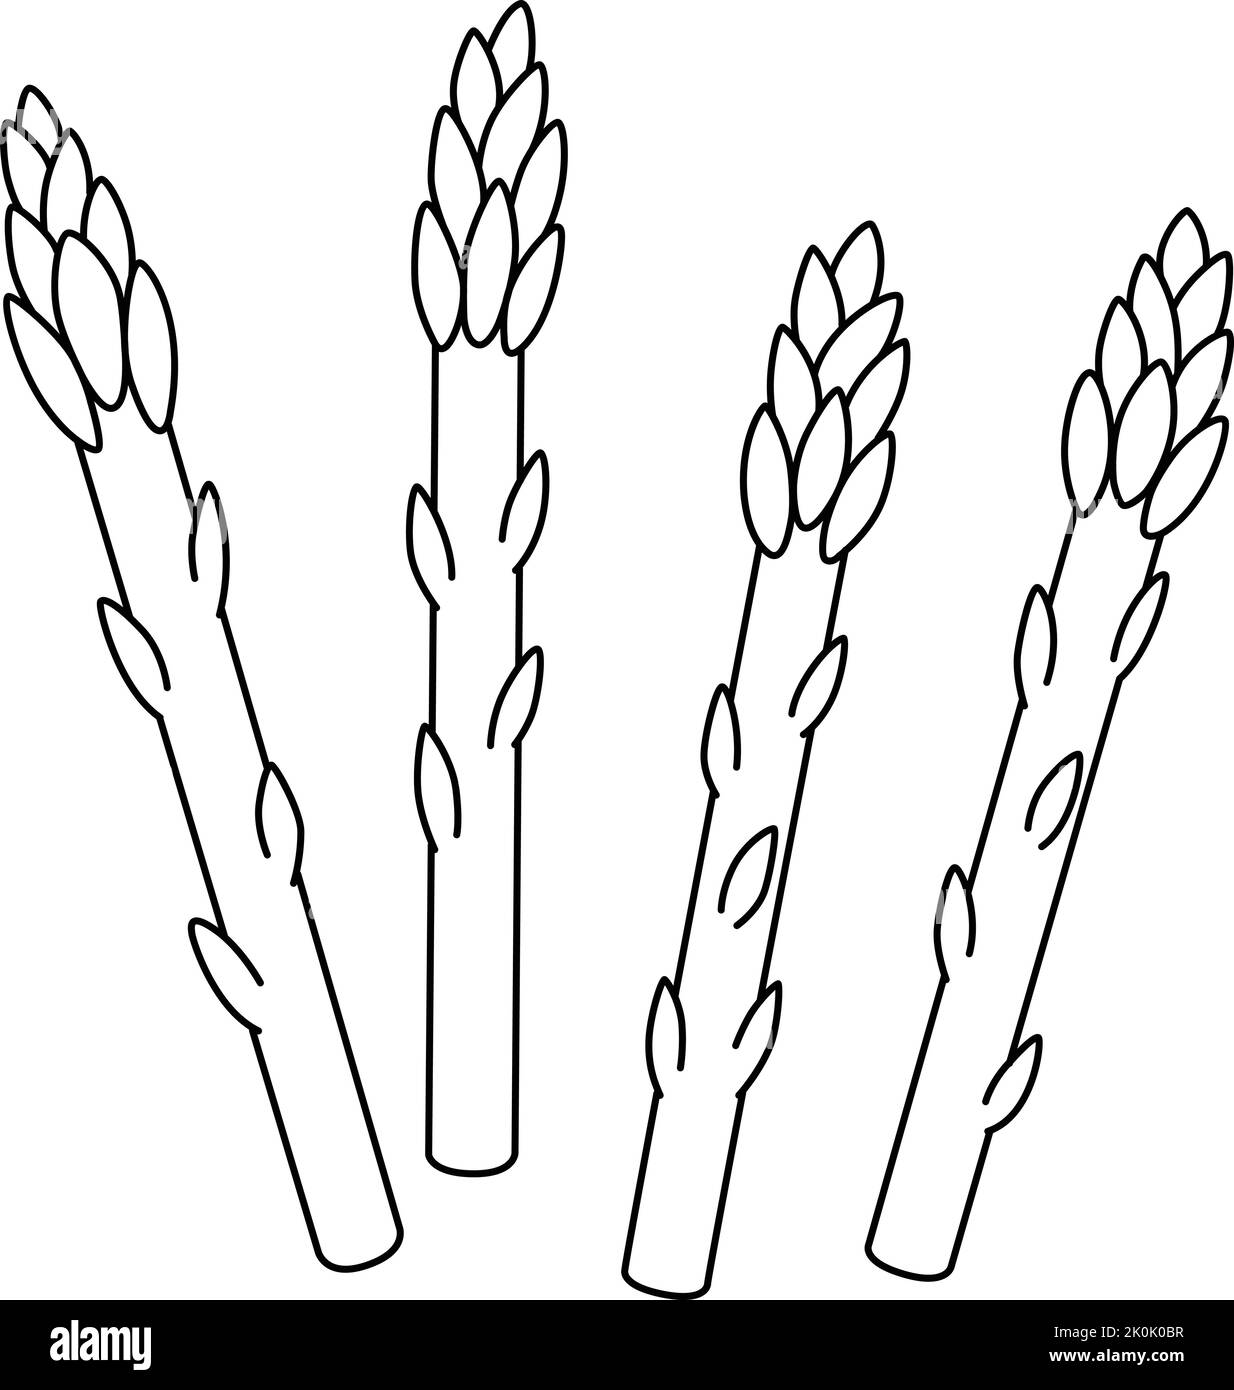 Asparagus Vegetable Isolated Coloring Page  Stock Vector